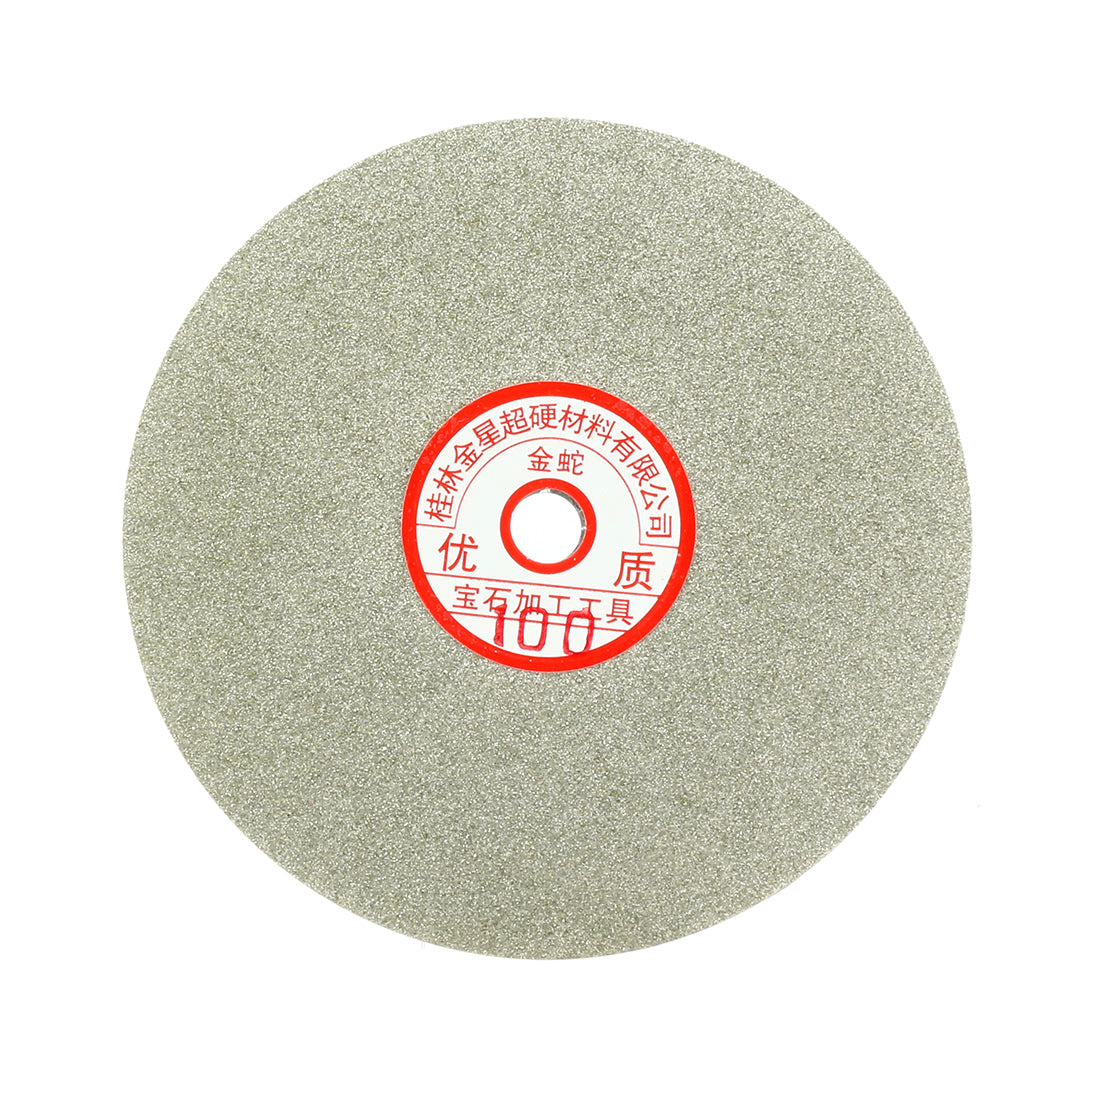 uxcell Uxcell 6-inch Grit 100 Diamond Coated Flat Lap Wheel Grinding Sanding Polishing Disc